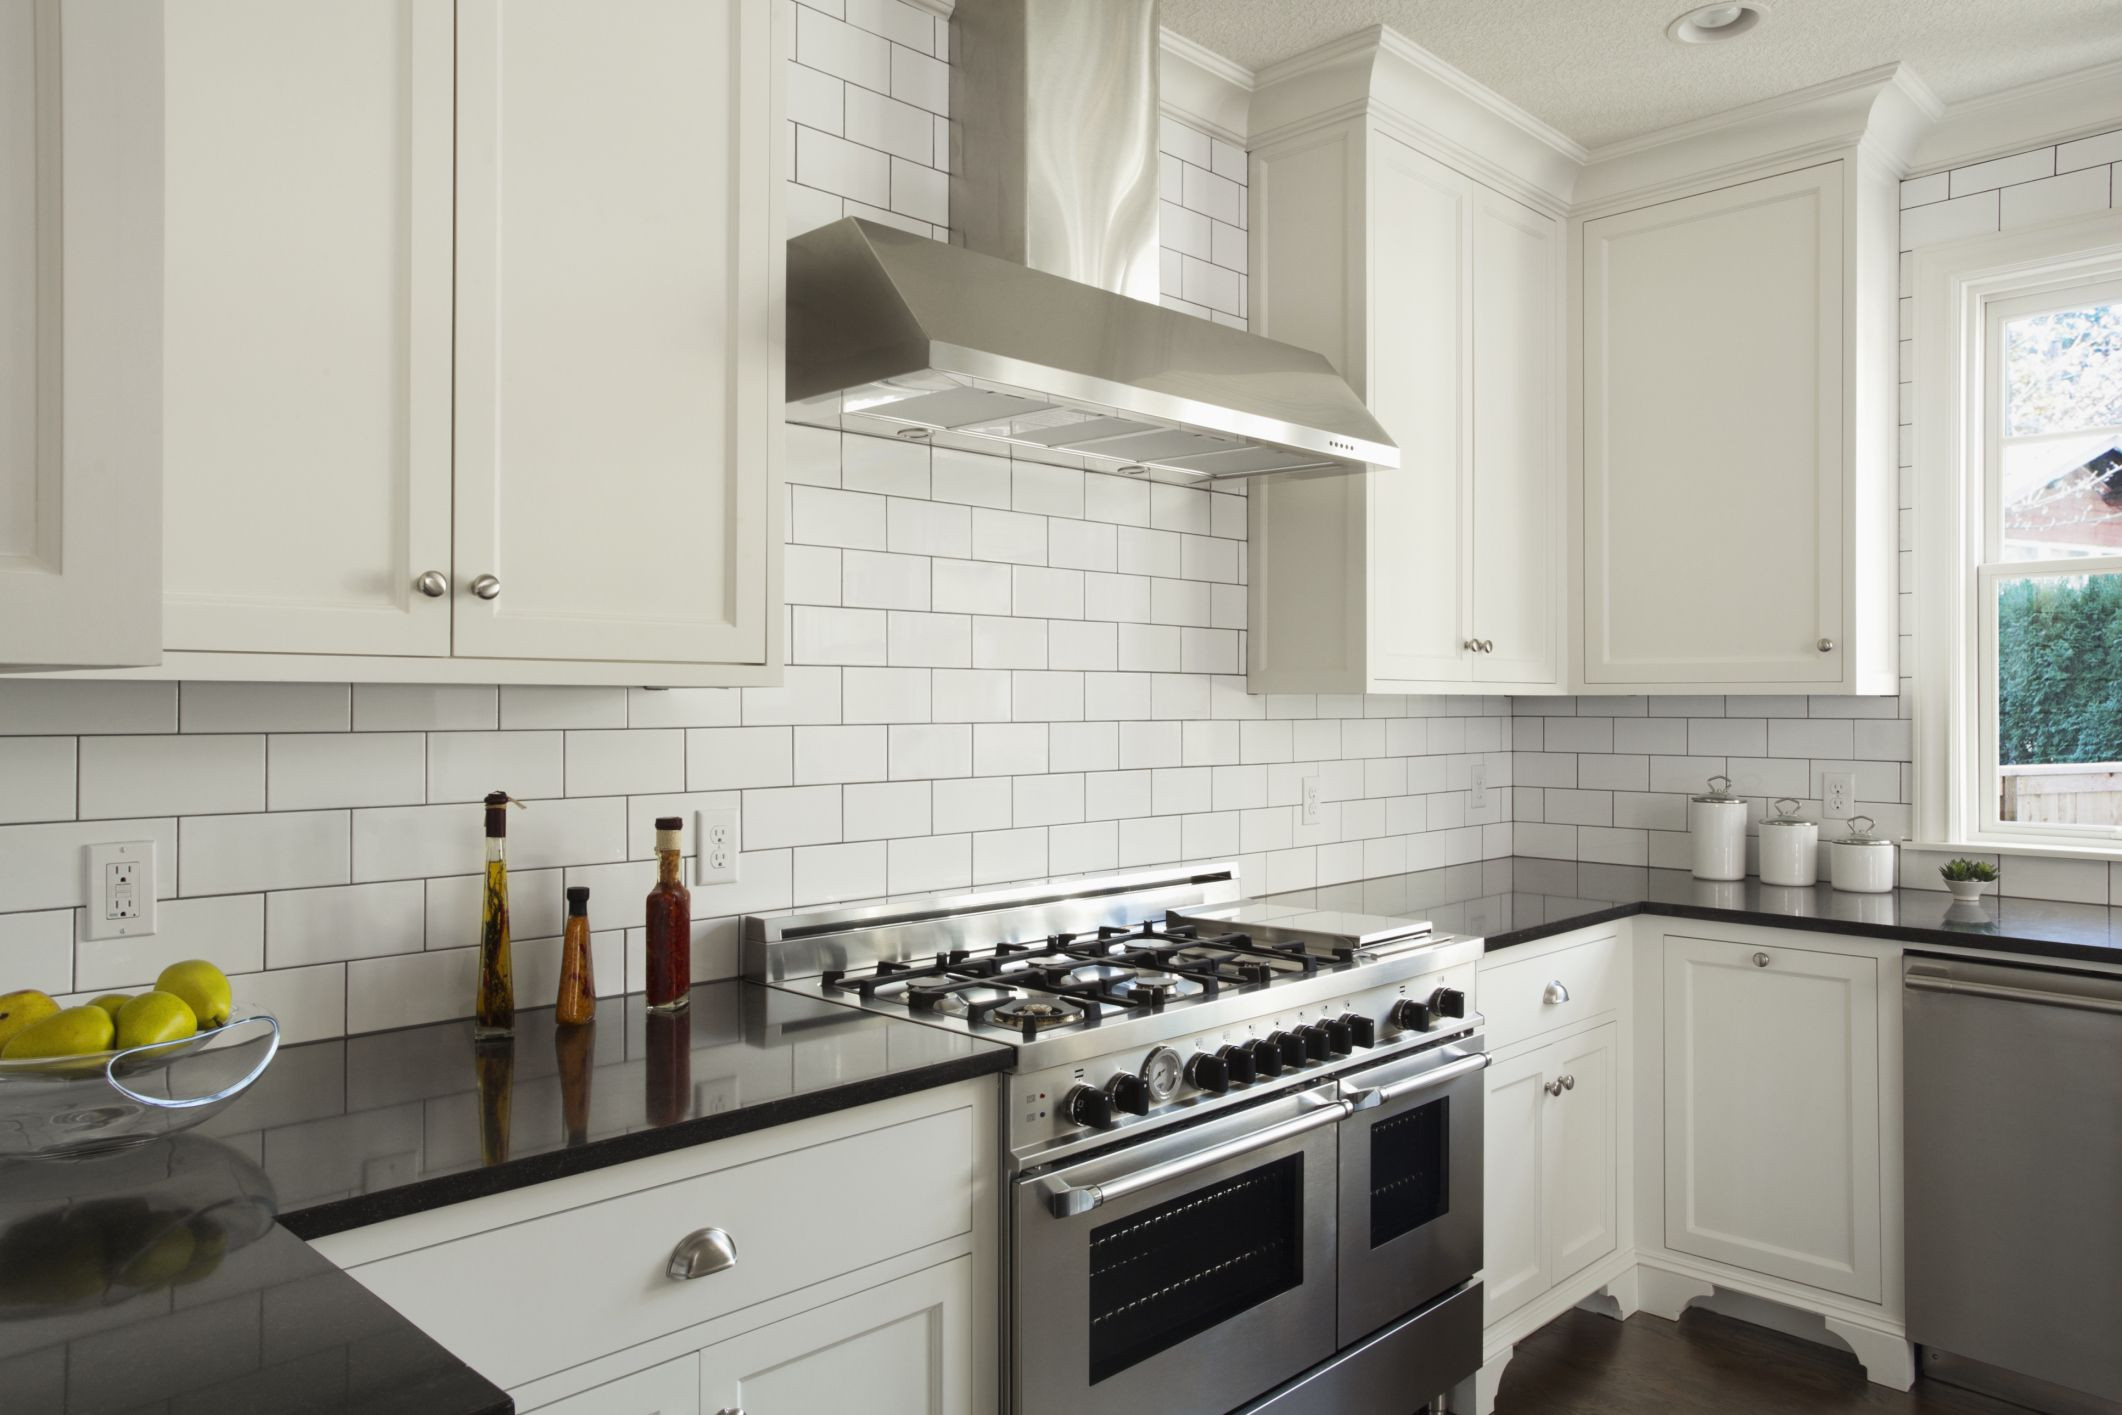 Kitchen Subway Tile
 How Subway Tile Can Effectively Work in Modern Rooms